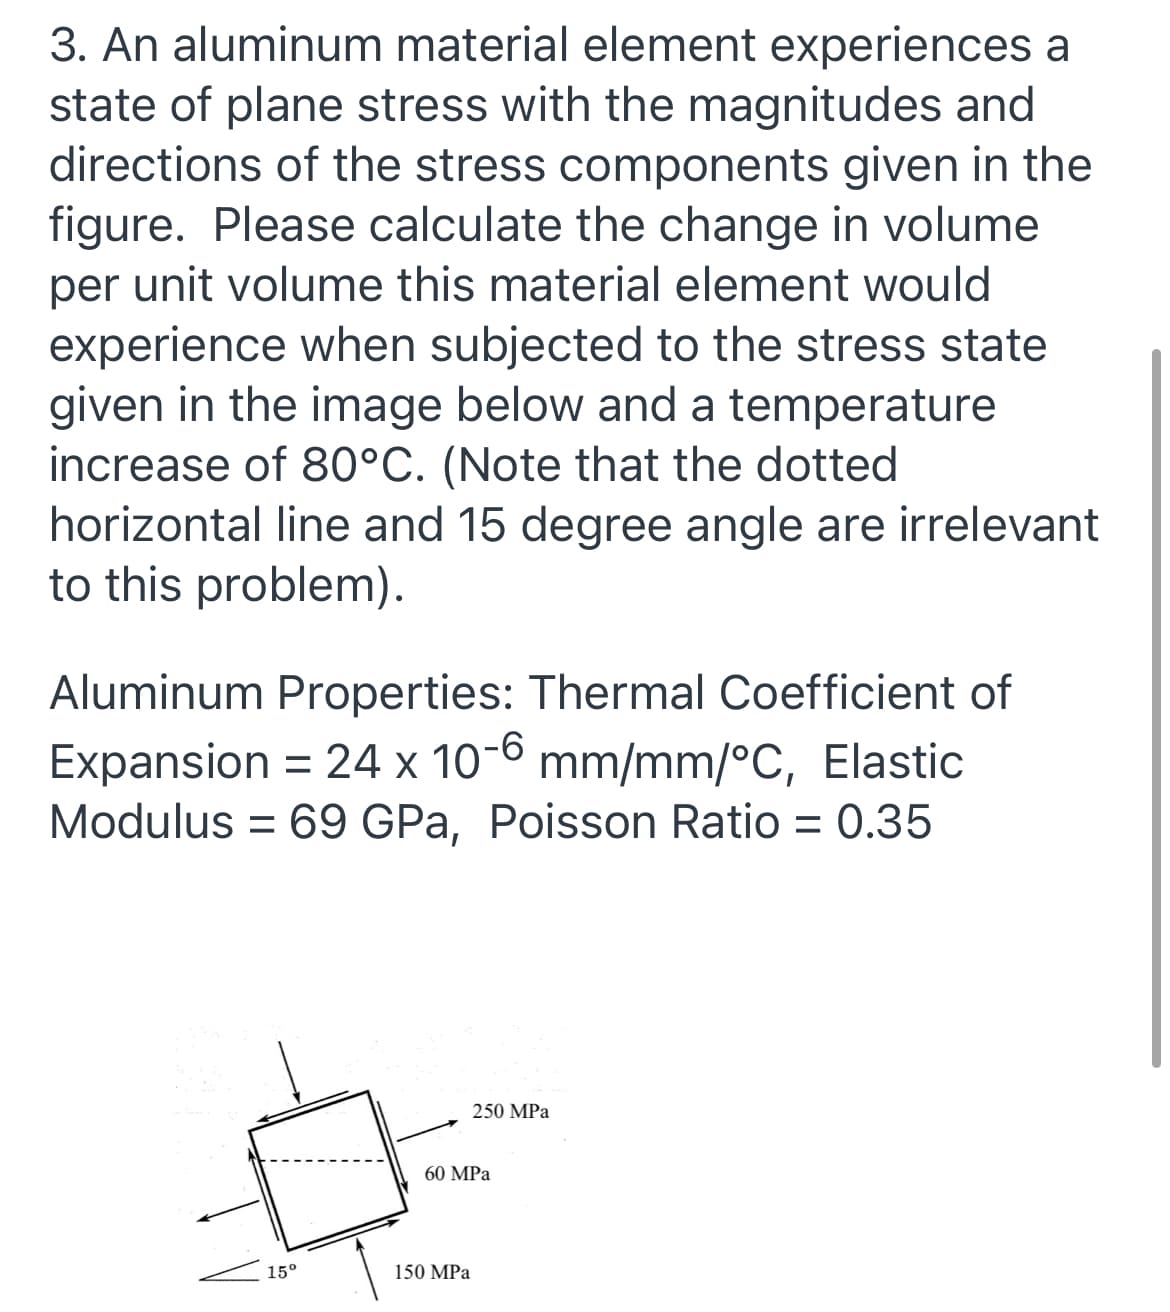 3. An aluminum material element experiences a
state of plane stress with the magnitudes and
directions of the stress components given in the
figure. Please calculate the change in volume
per unit volume this material element would
experience when subjected to the stress state
given in the image below and a temperature
increase of 80°C. (Note that the dotted
horizontal line and 15 degree angle are irrelevant
to this problem).
Aluminum Properties: Thermal Coefficient of
Expansion = 24 x 10-6 mm/mm/°C, Elastic
Modulus = 69 GPa, Poisson Ratio = 0.35
250 MPa
60 MPa
15°
150 MPa
